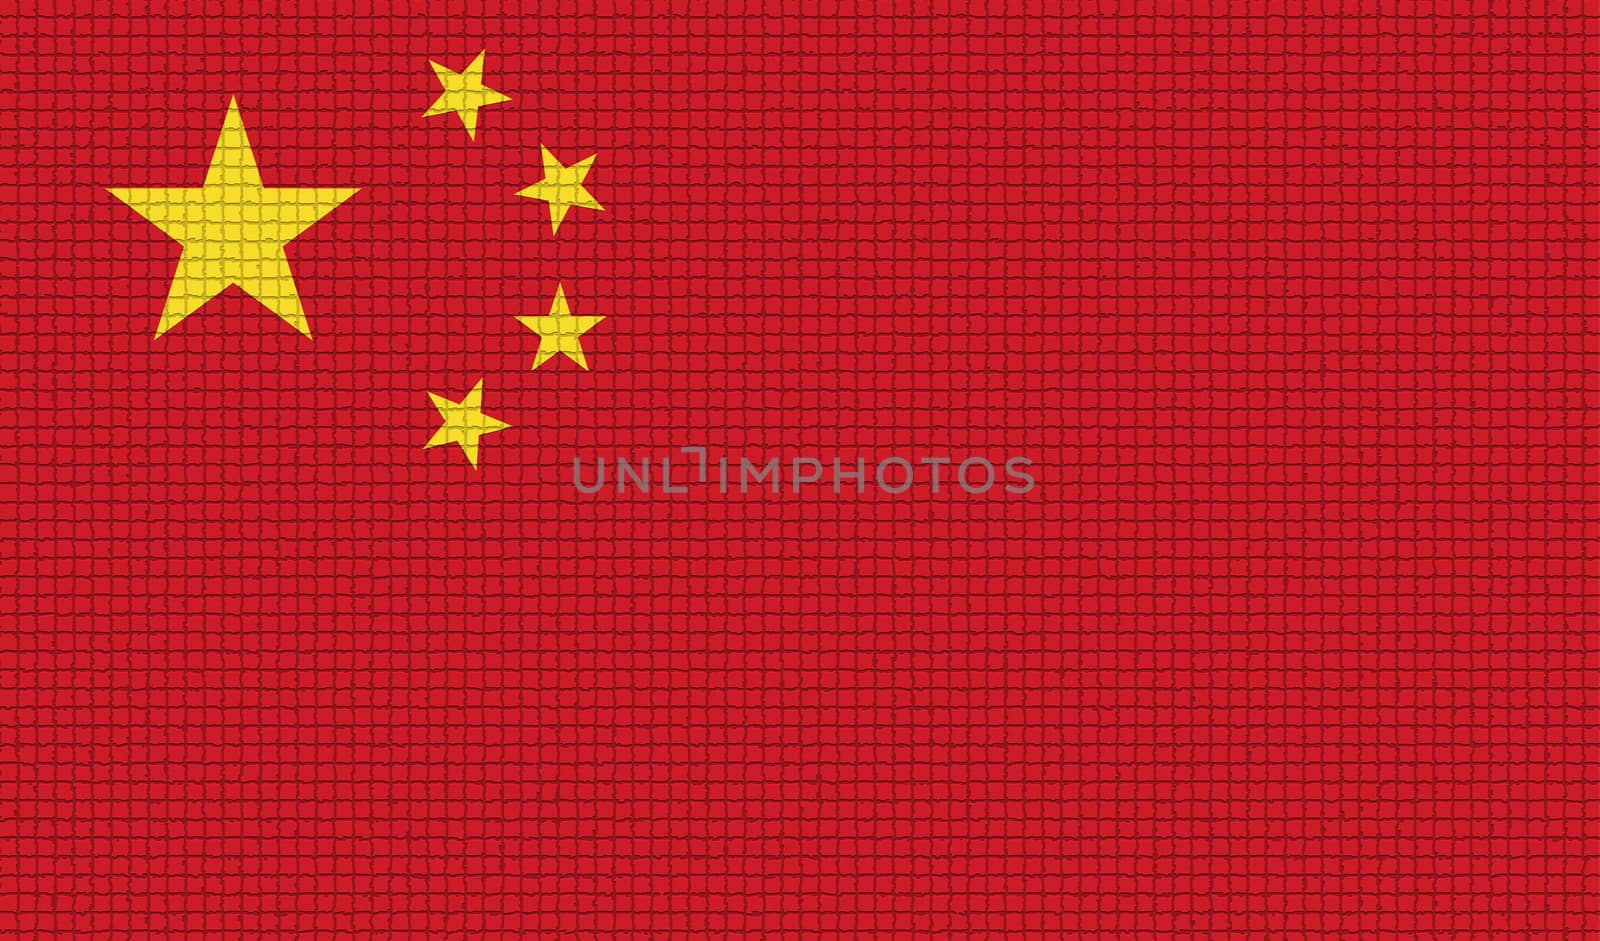 Flags of China with abstract textures. Rasterized version